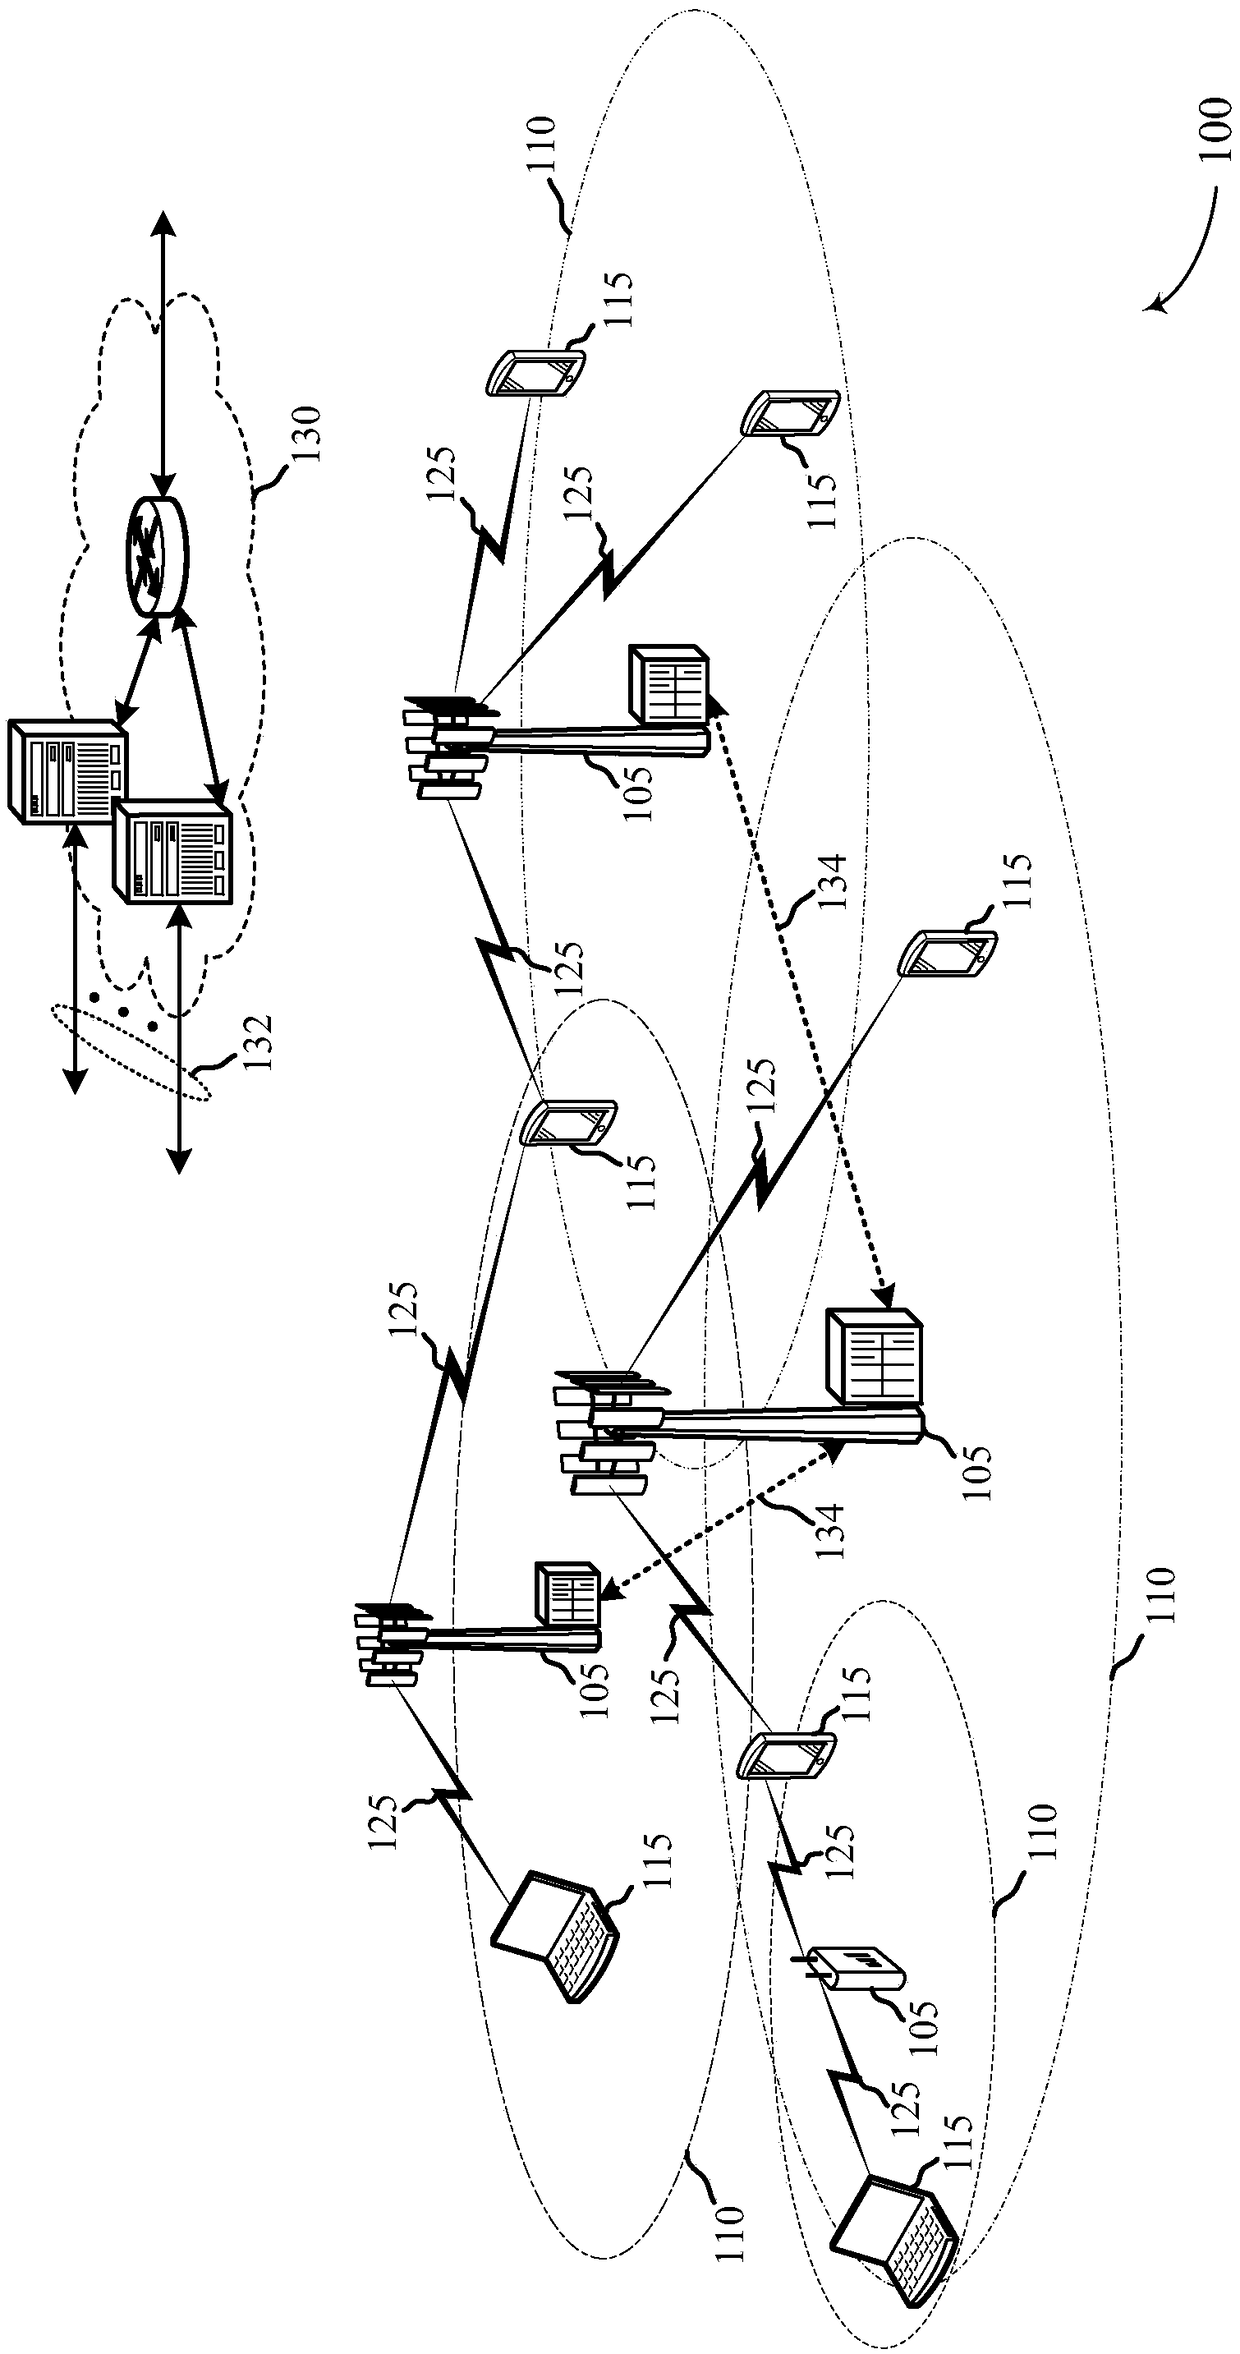 Discovery reference signal transmission window detection and random access procedure selection